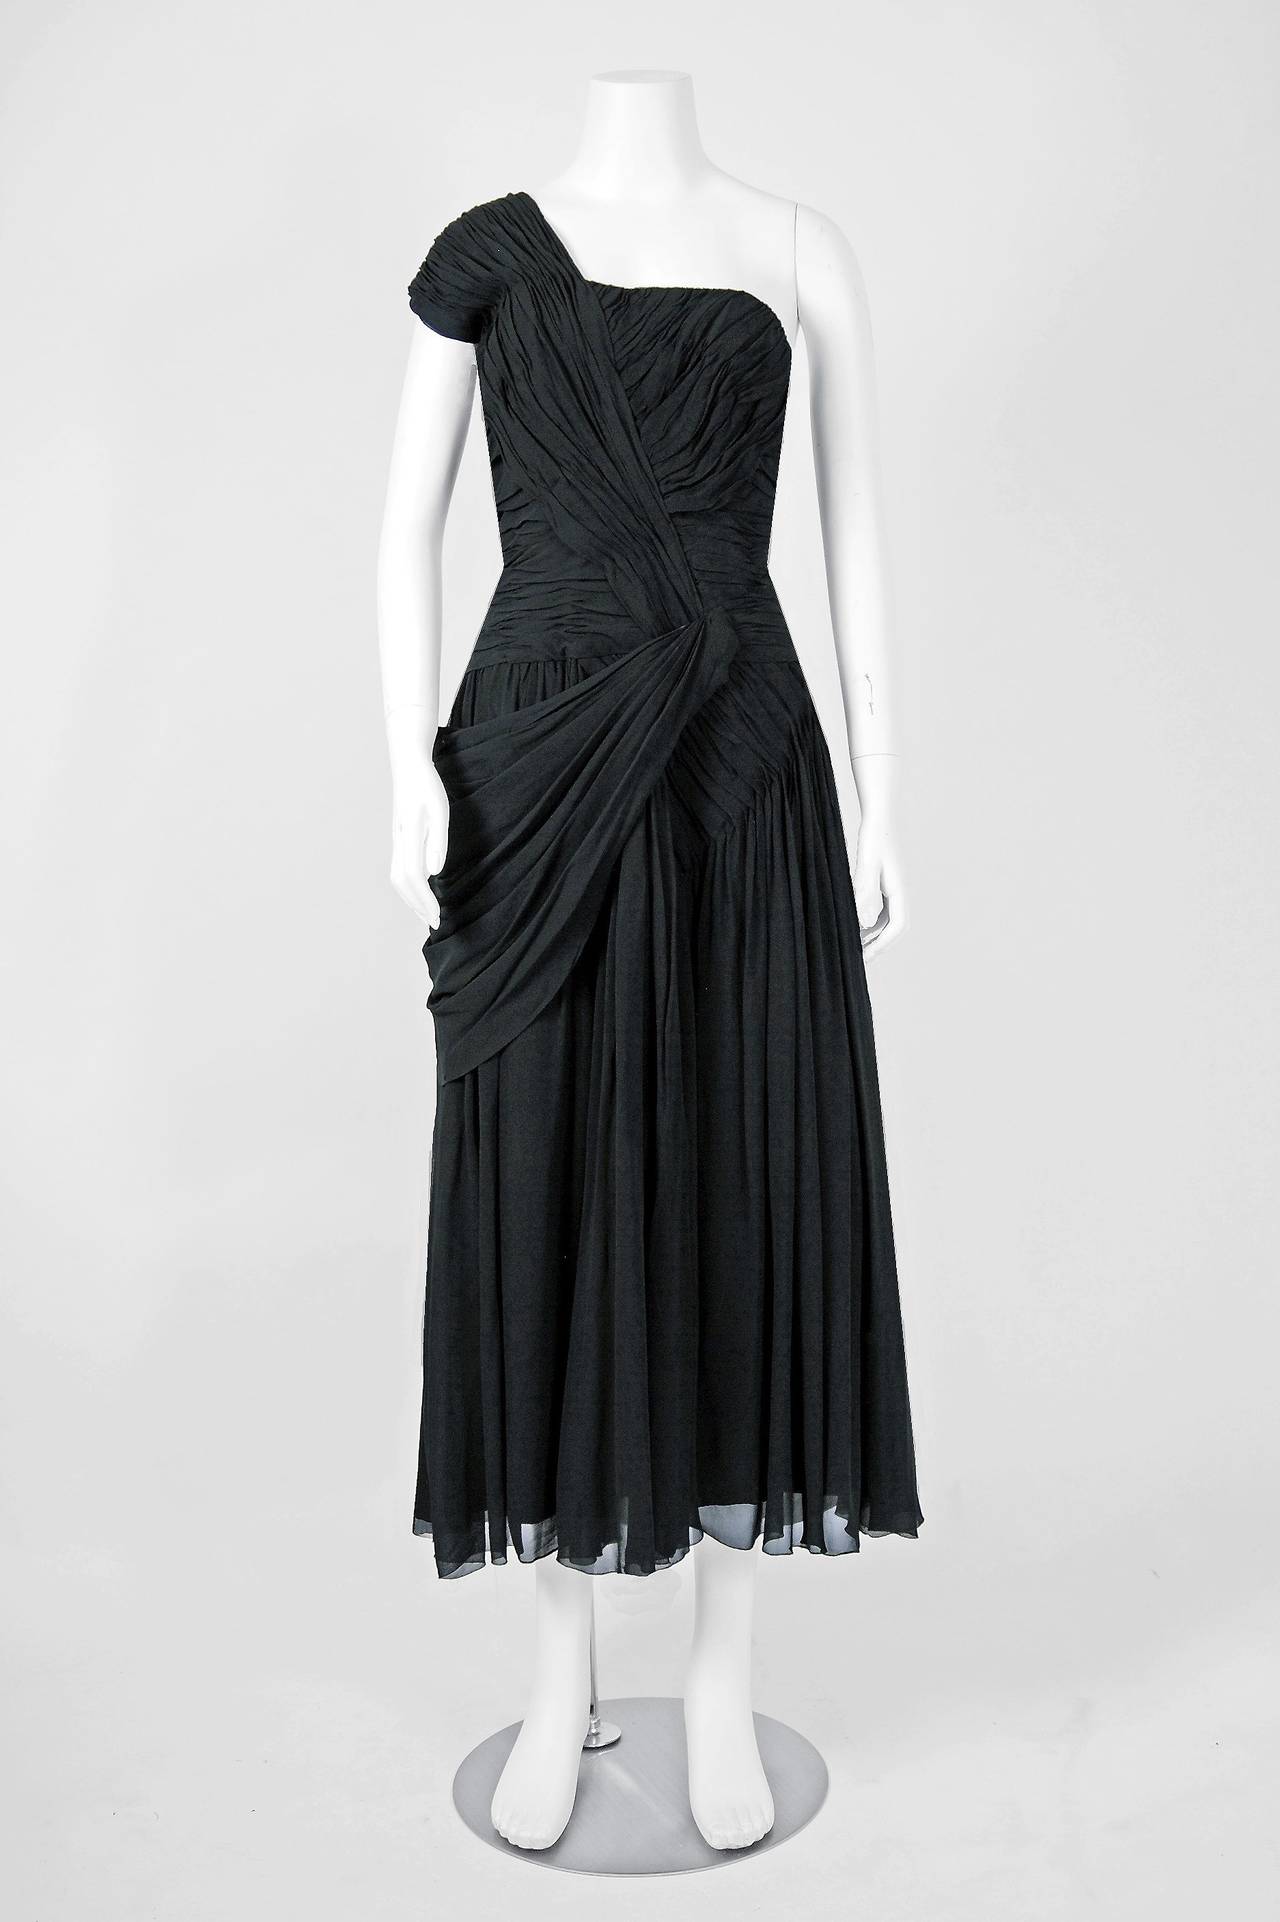 Seductive 1950's French custom-made goddess dress from the 